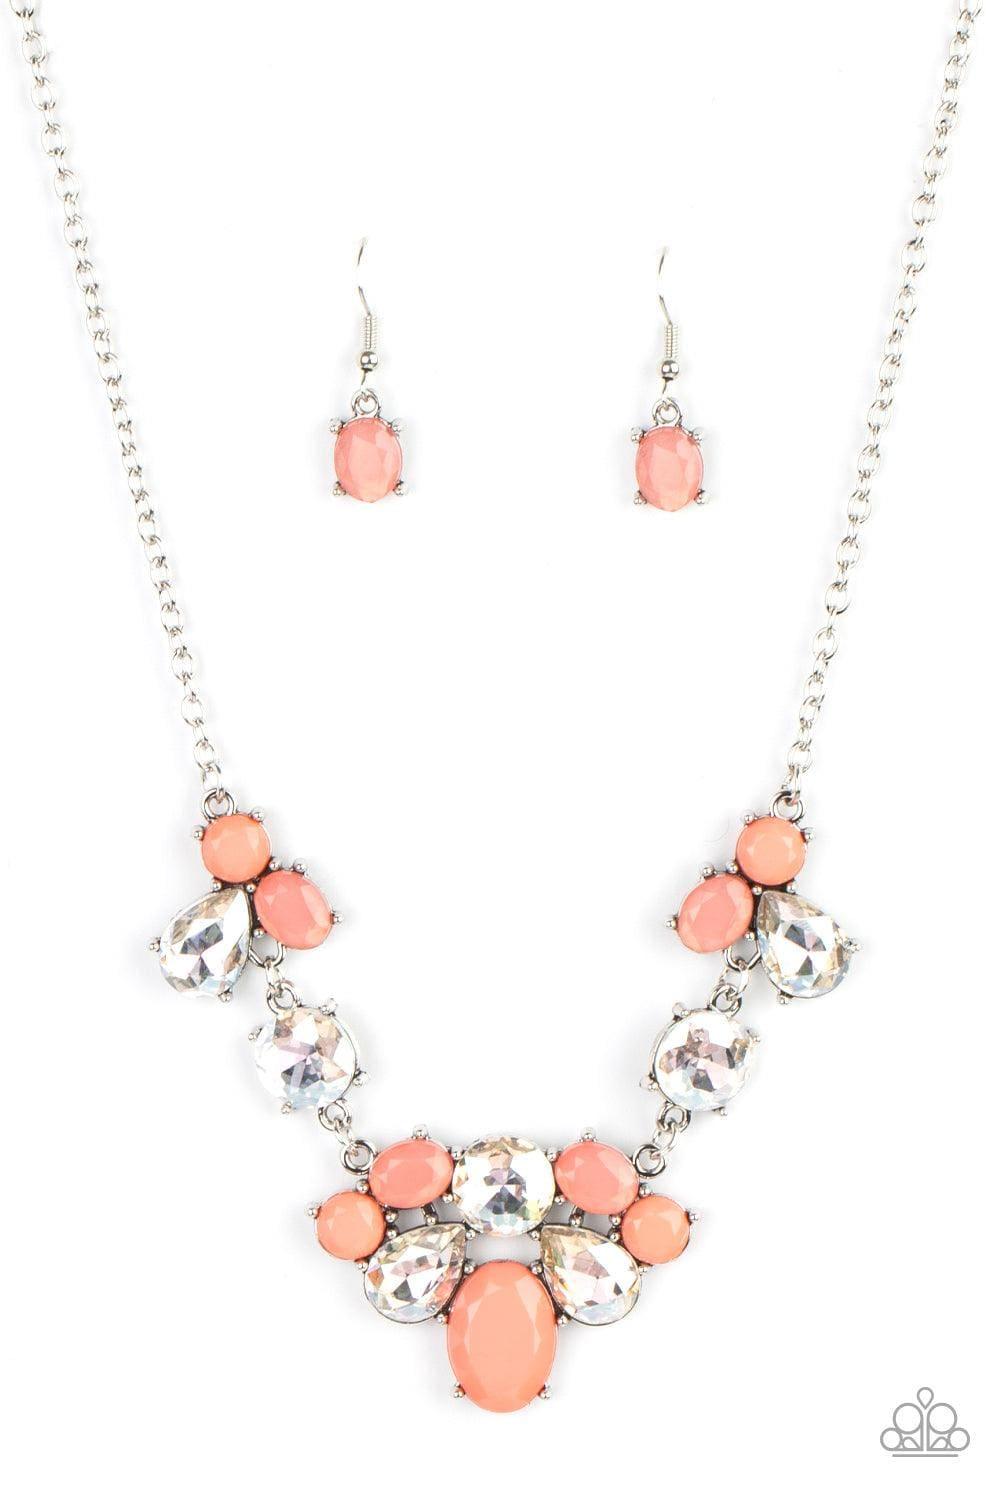 Paparazzi Accessories - Ethereal Romance – Orange (coral) Necklace - Bling by JessieK